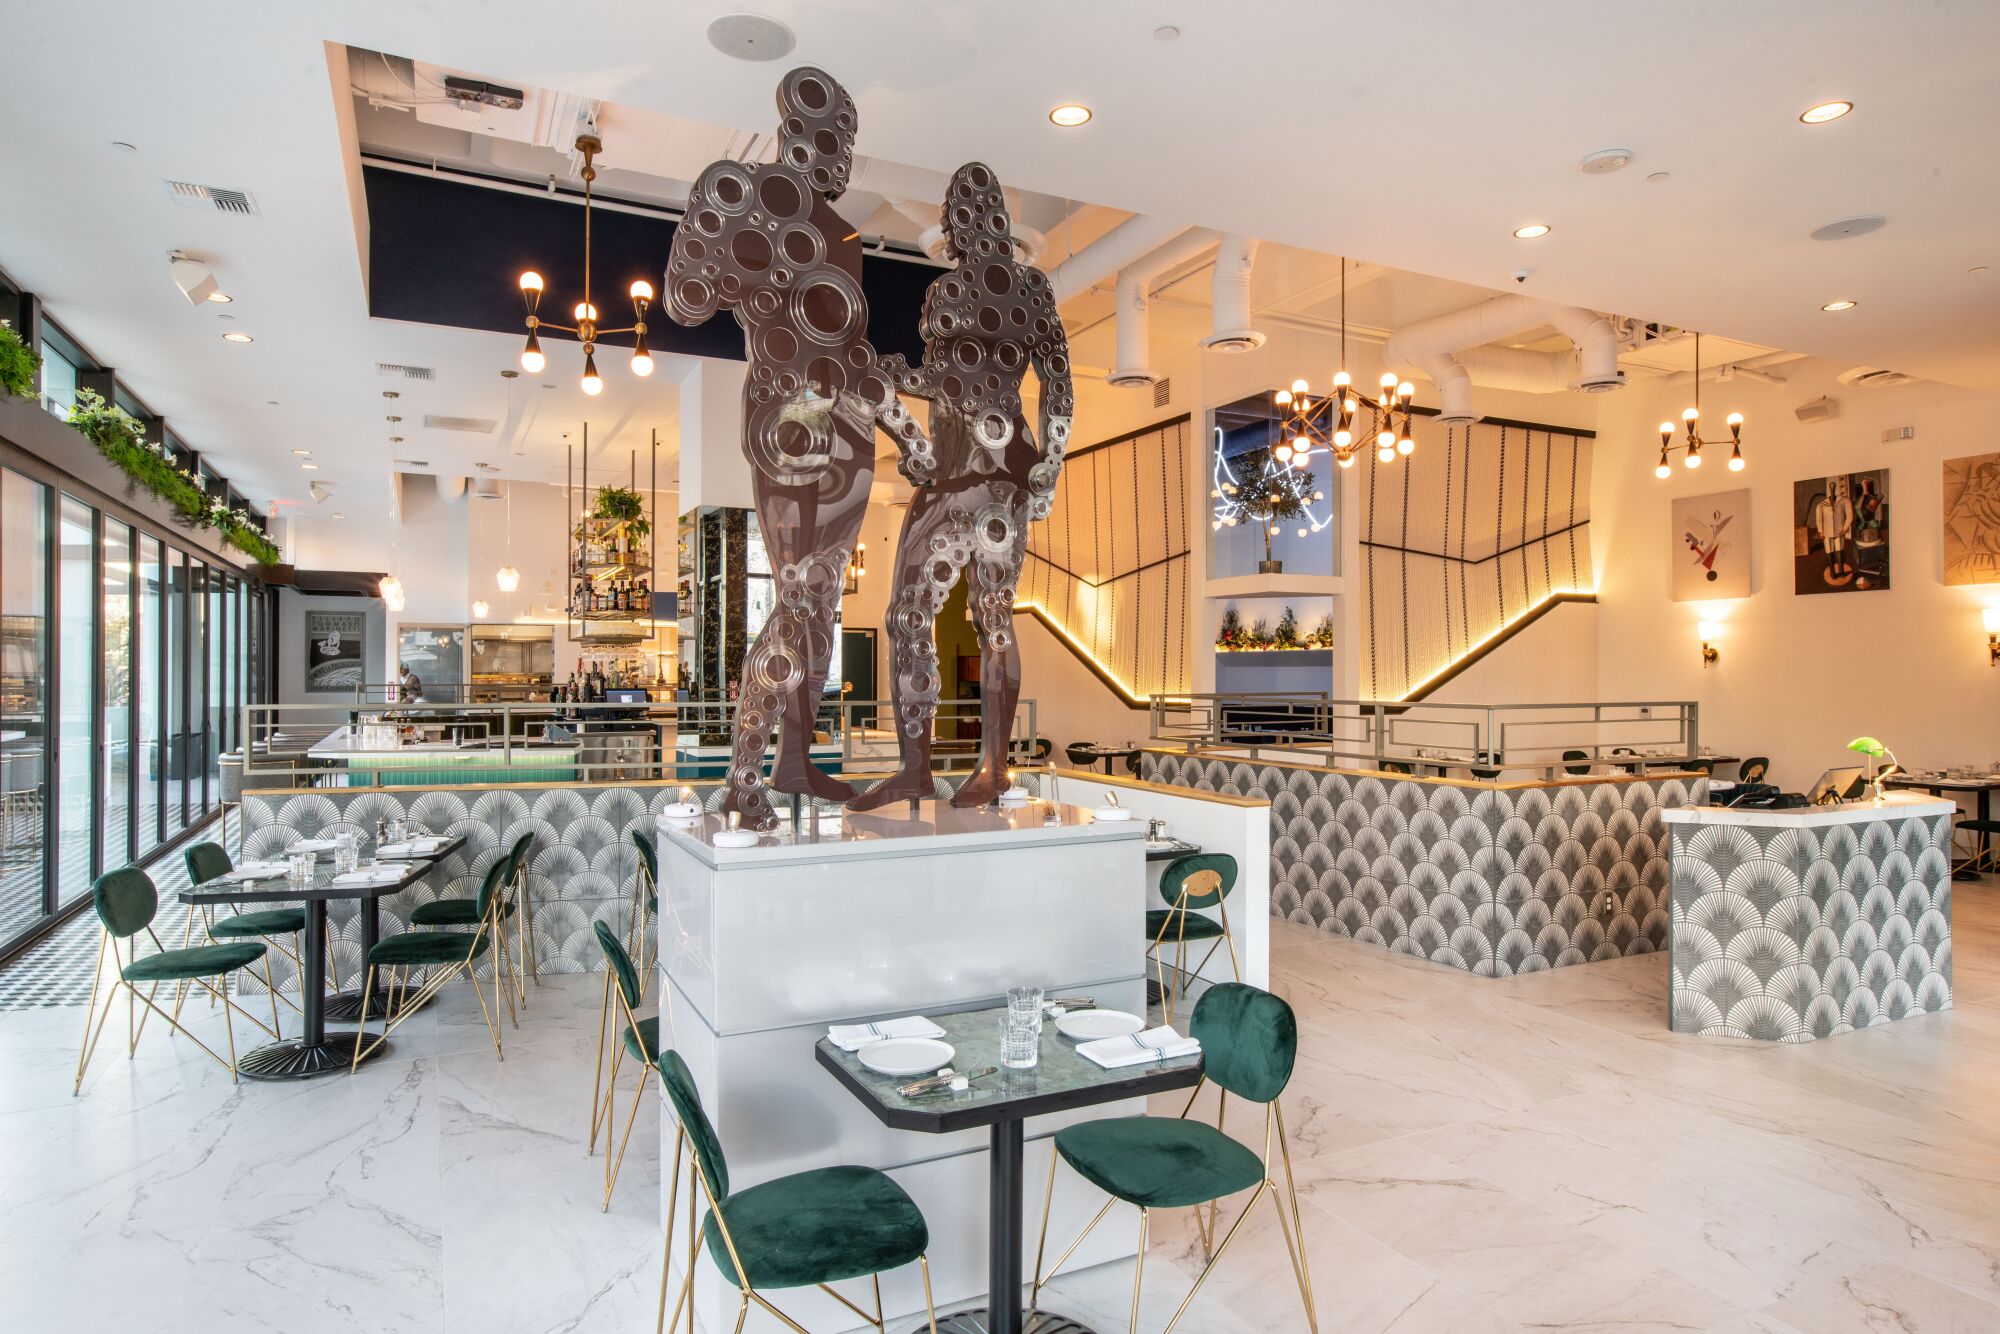 Il Dandy's dining room and its striking Bronzi di Riace sculpture.